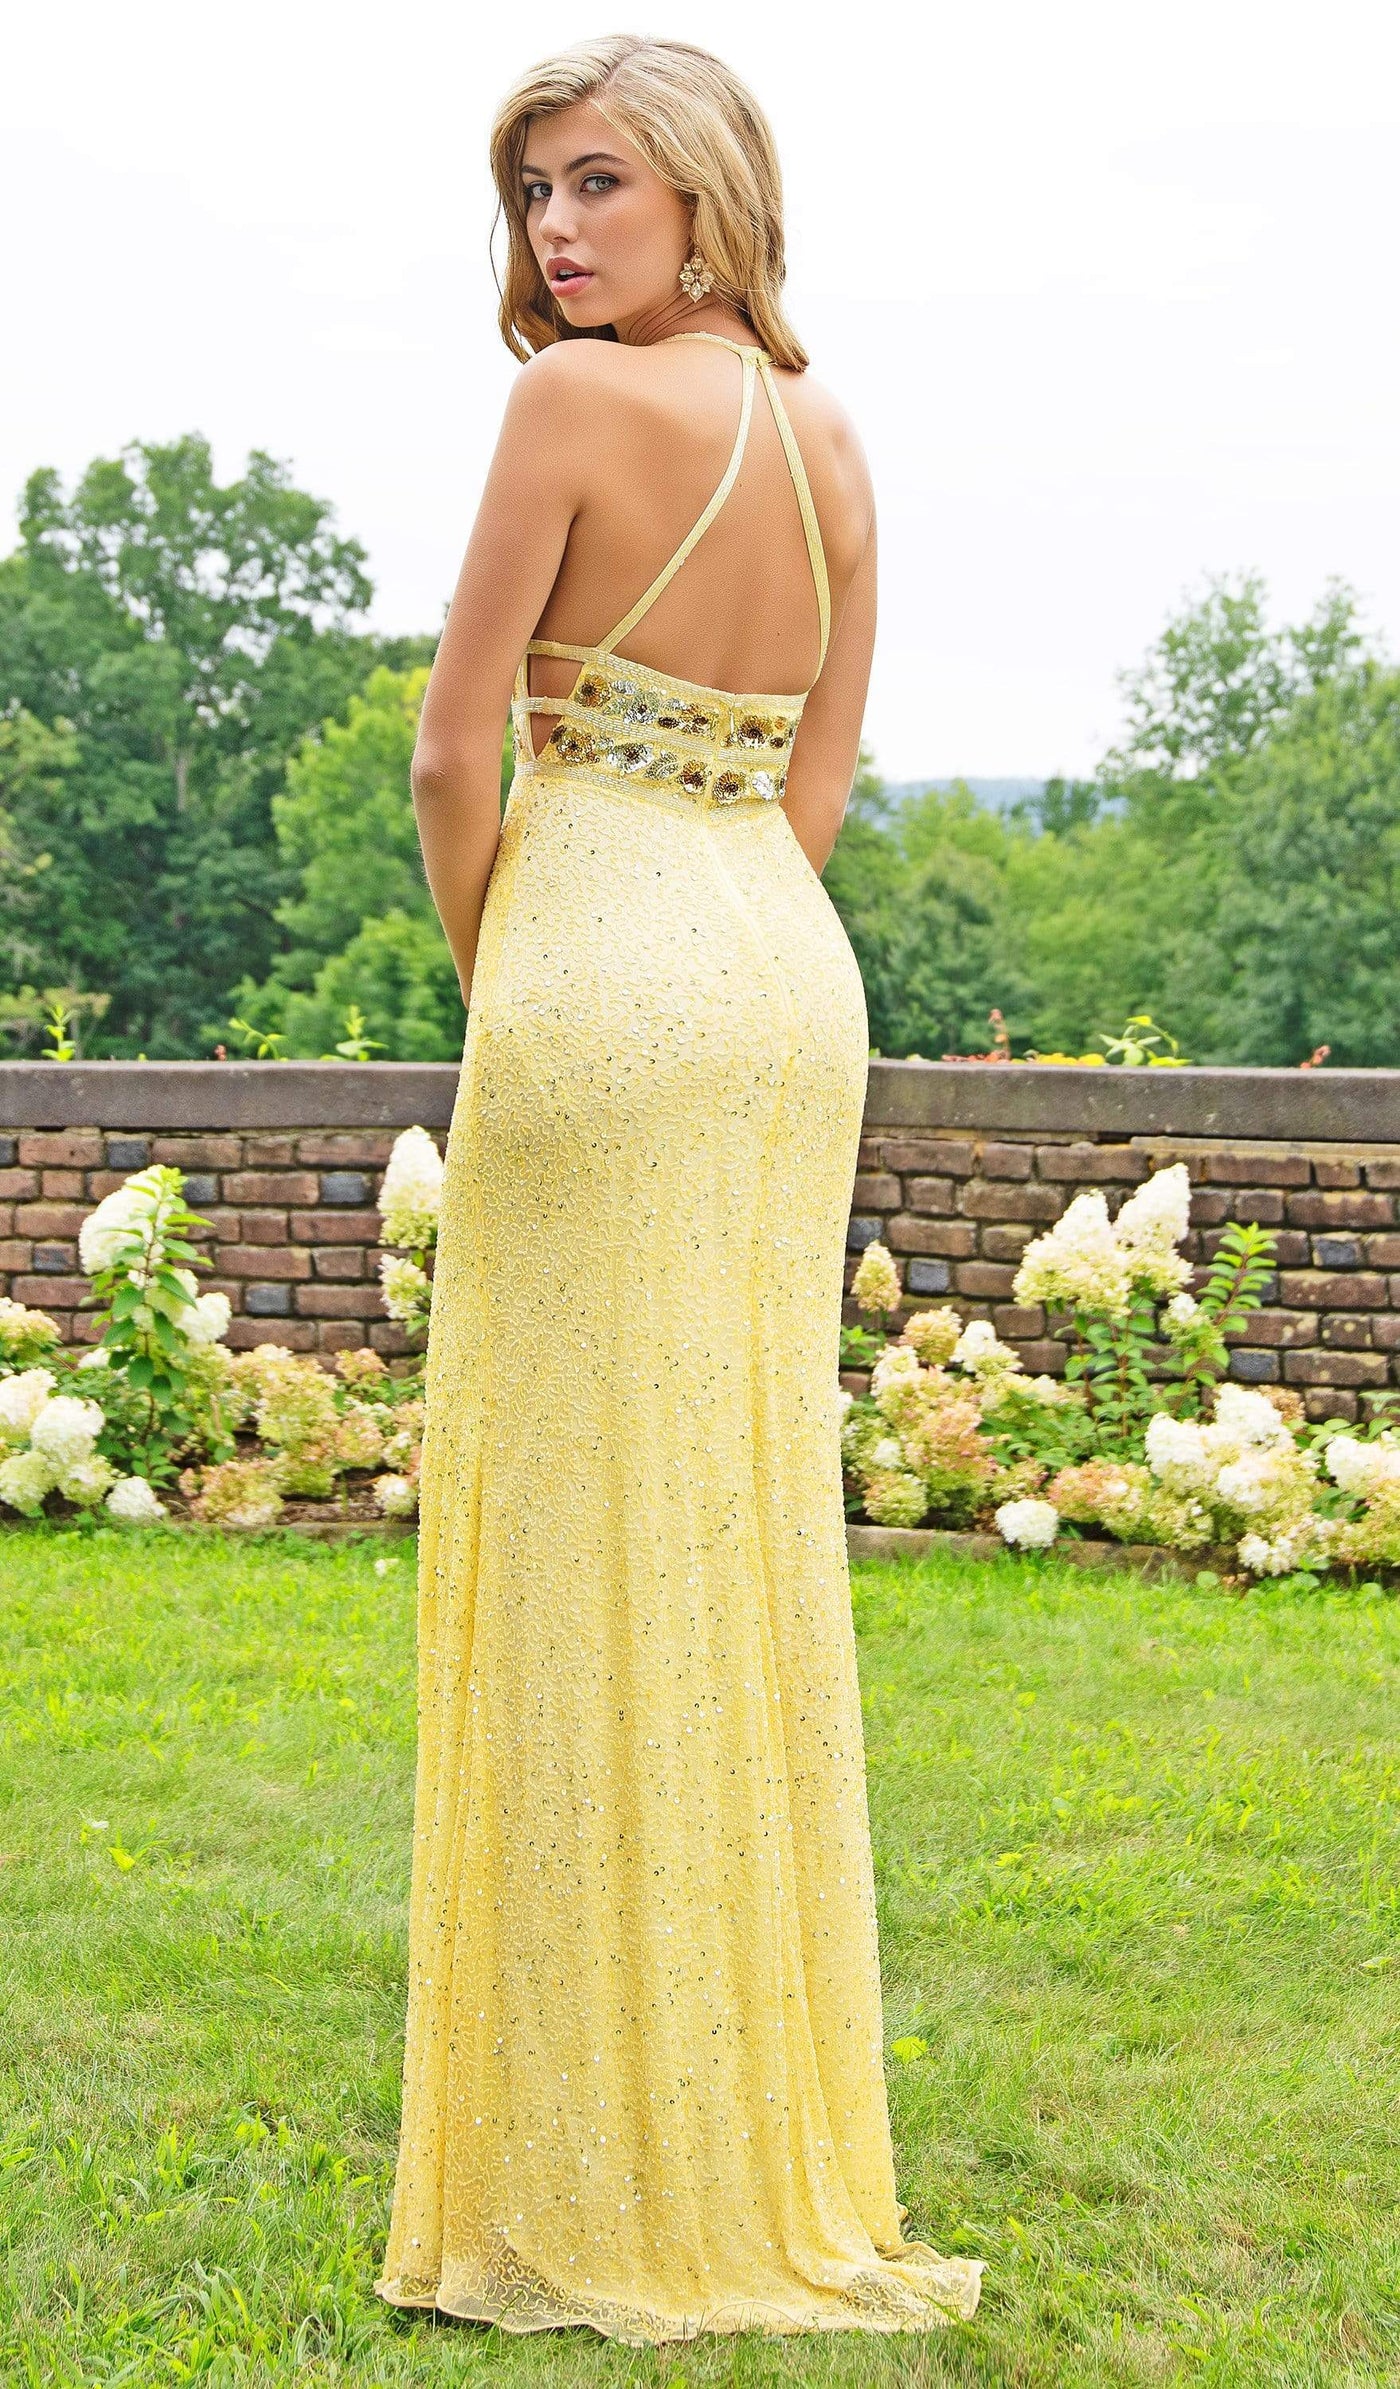 Primavera Couture - 3216 Beaded and Sequin Embellished Evening Gown Special Occasion Dress